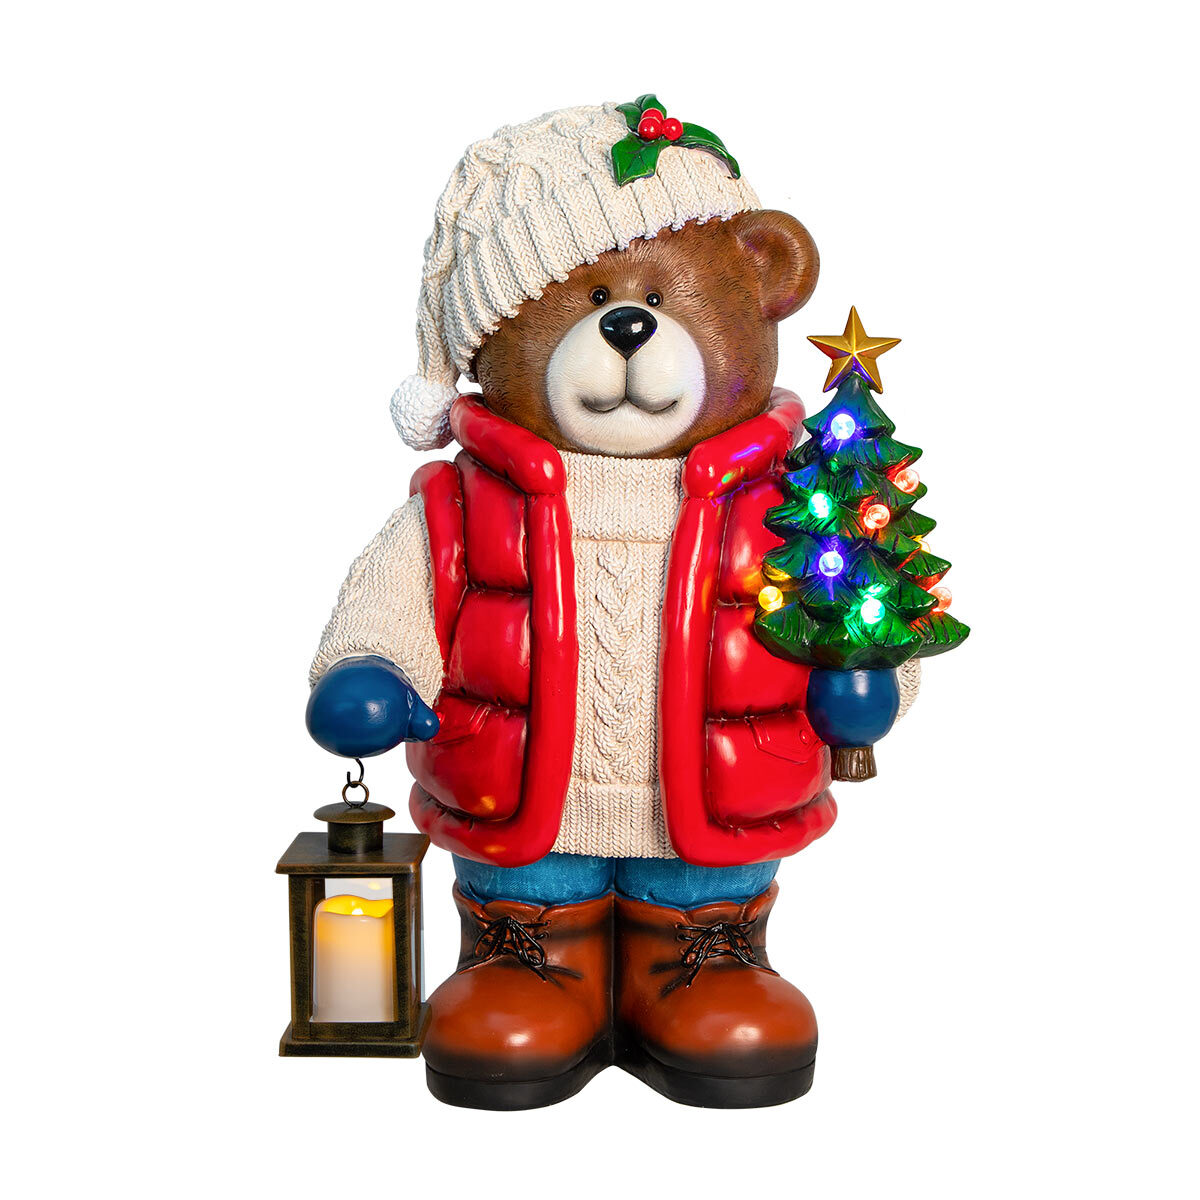 Buy Bear with Lantern Greeter Overview Image at Costco.co.uk